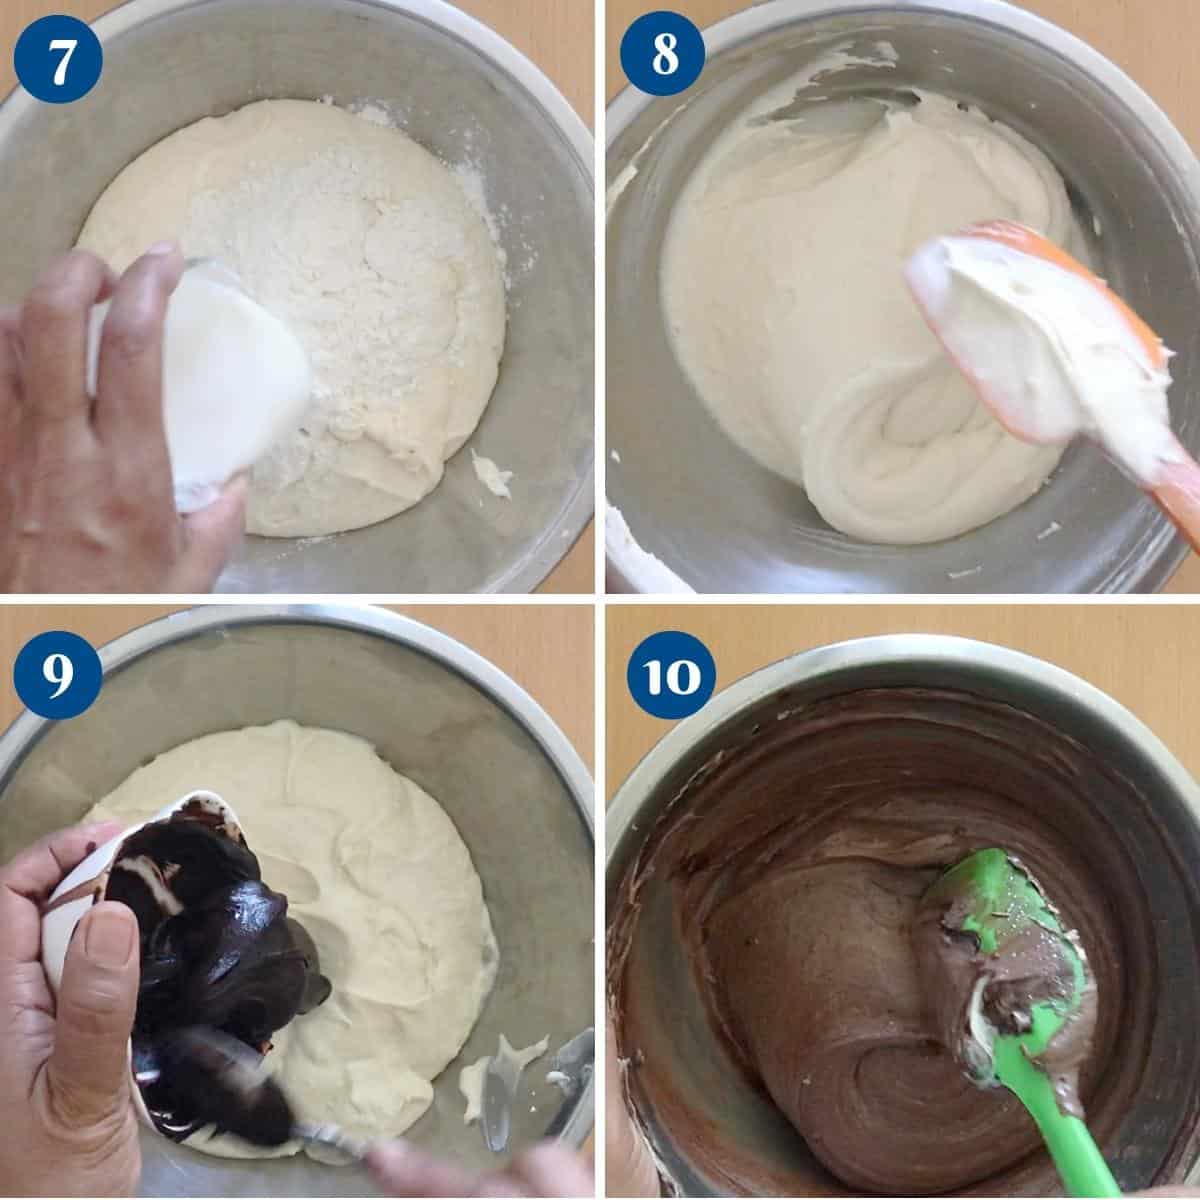 Progress pictures making chocolate and vanilla cake batter.